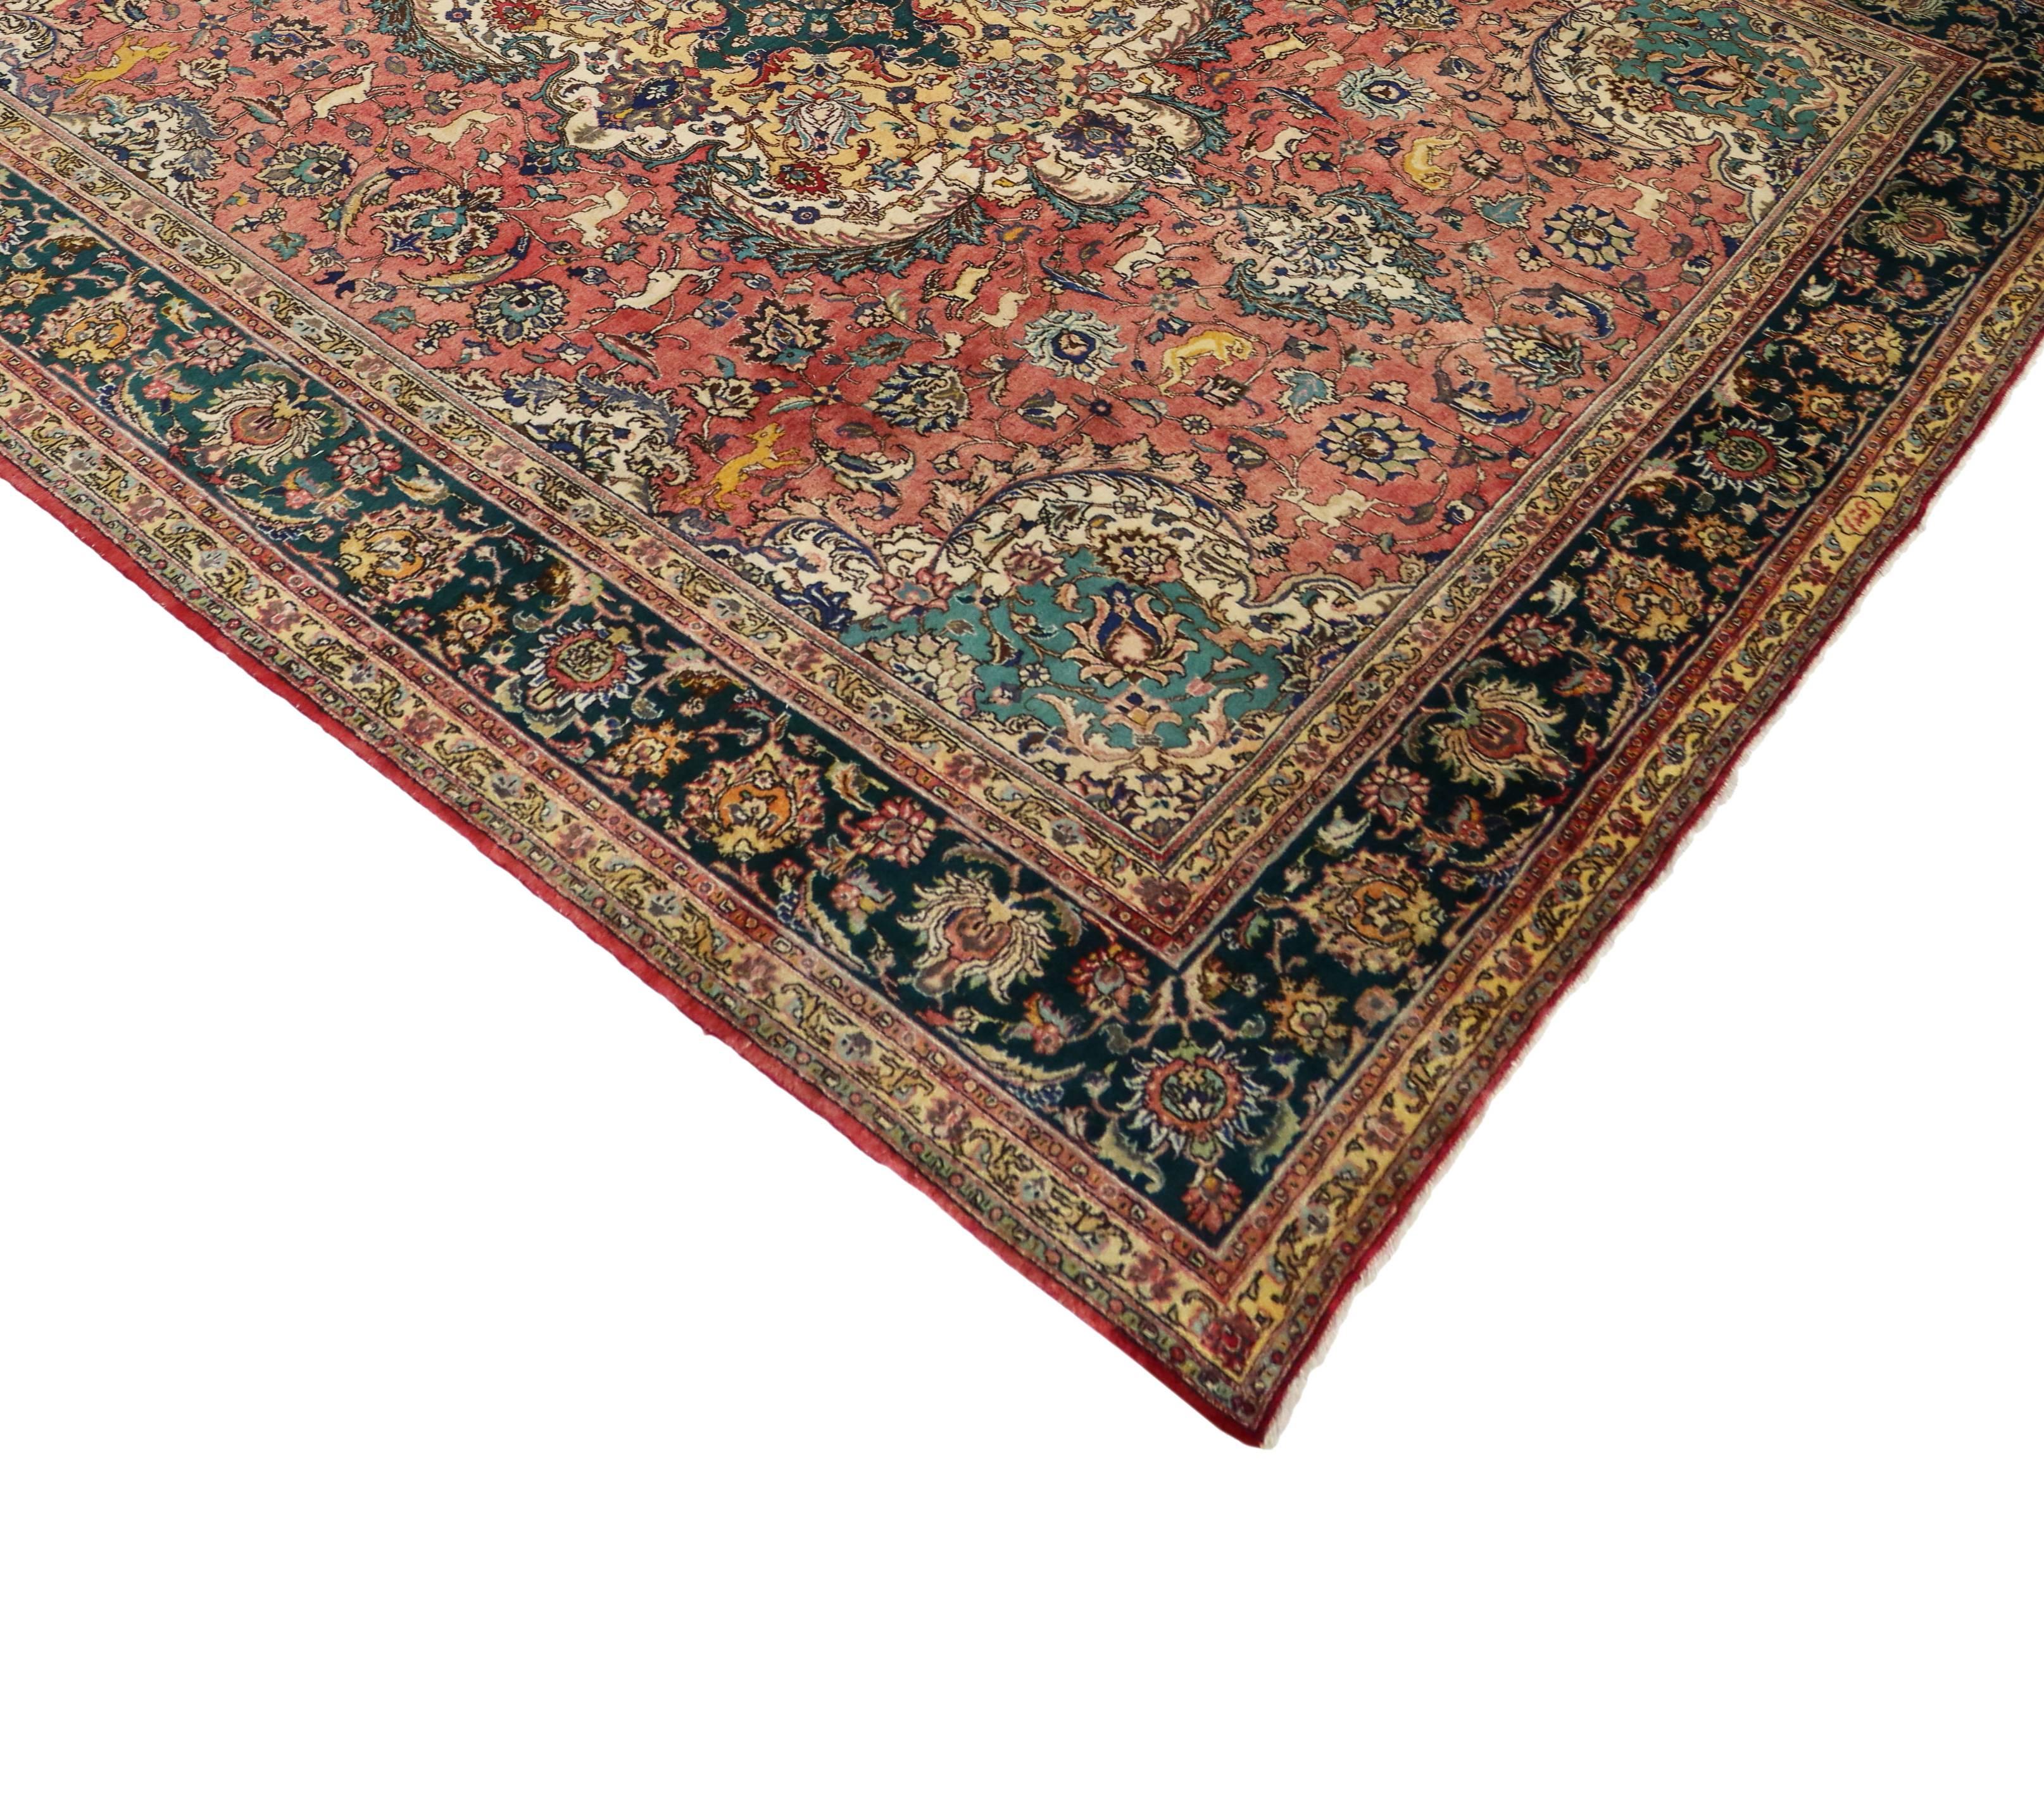 73734 Vintage Persian Tabriz Rug with Medieval Hunting Scene. From cozy casual to manor formal, relish the refinement as this vintage Persian Tabriz rug characterizes the formal grace and elegance of classical Persian style. With its time-softened